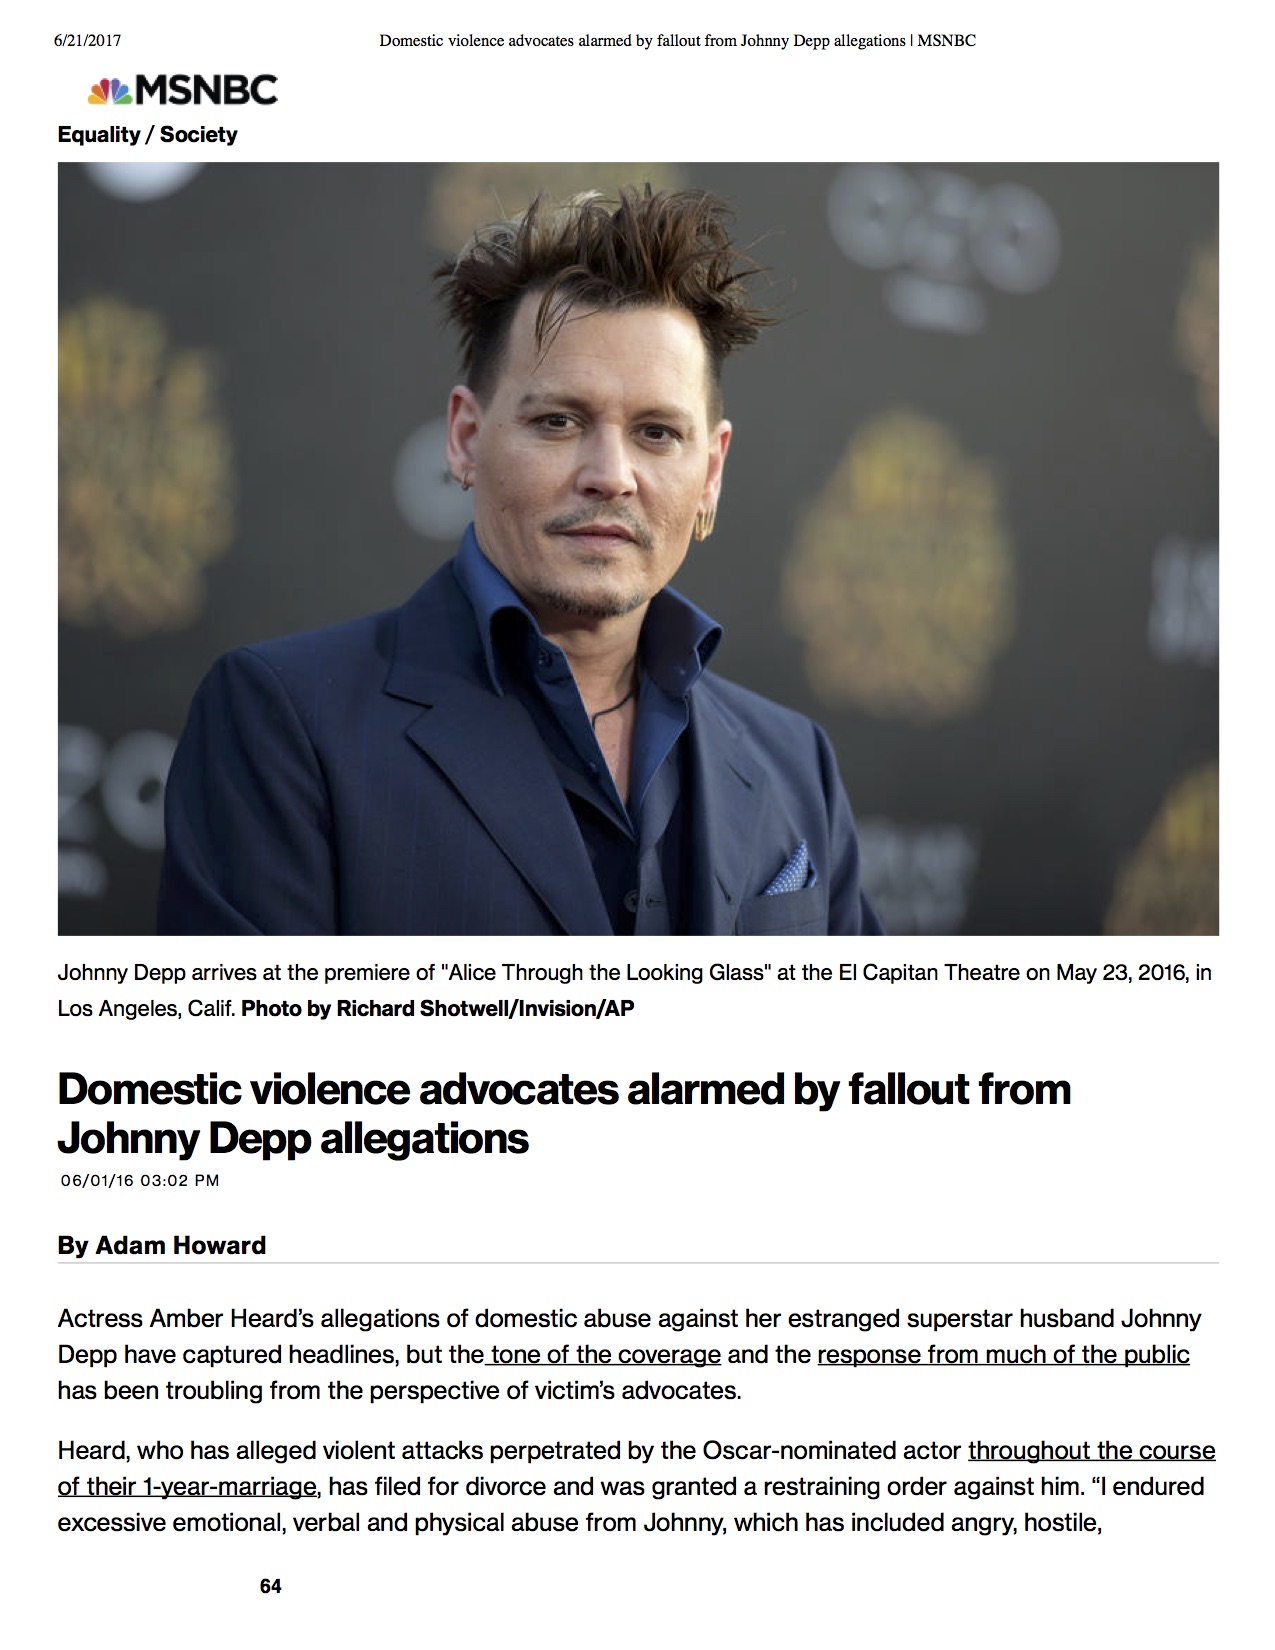 1Domestic violence advocates alarmed by fallout from Johnny Depp allegations _ MSNBC.jpg